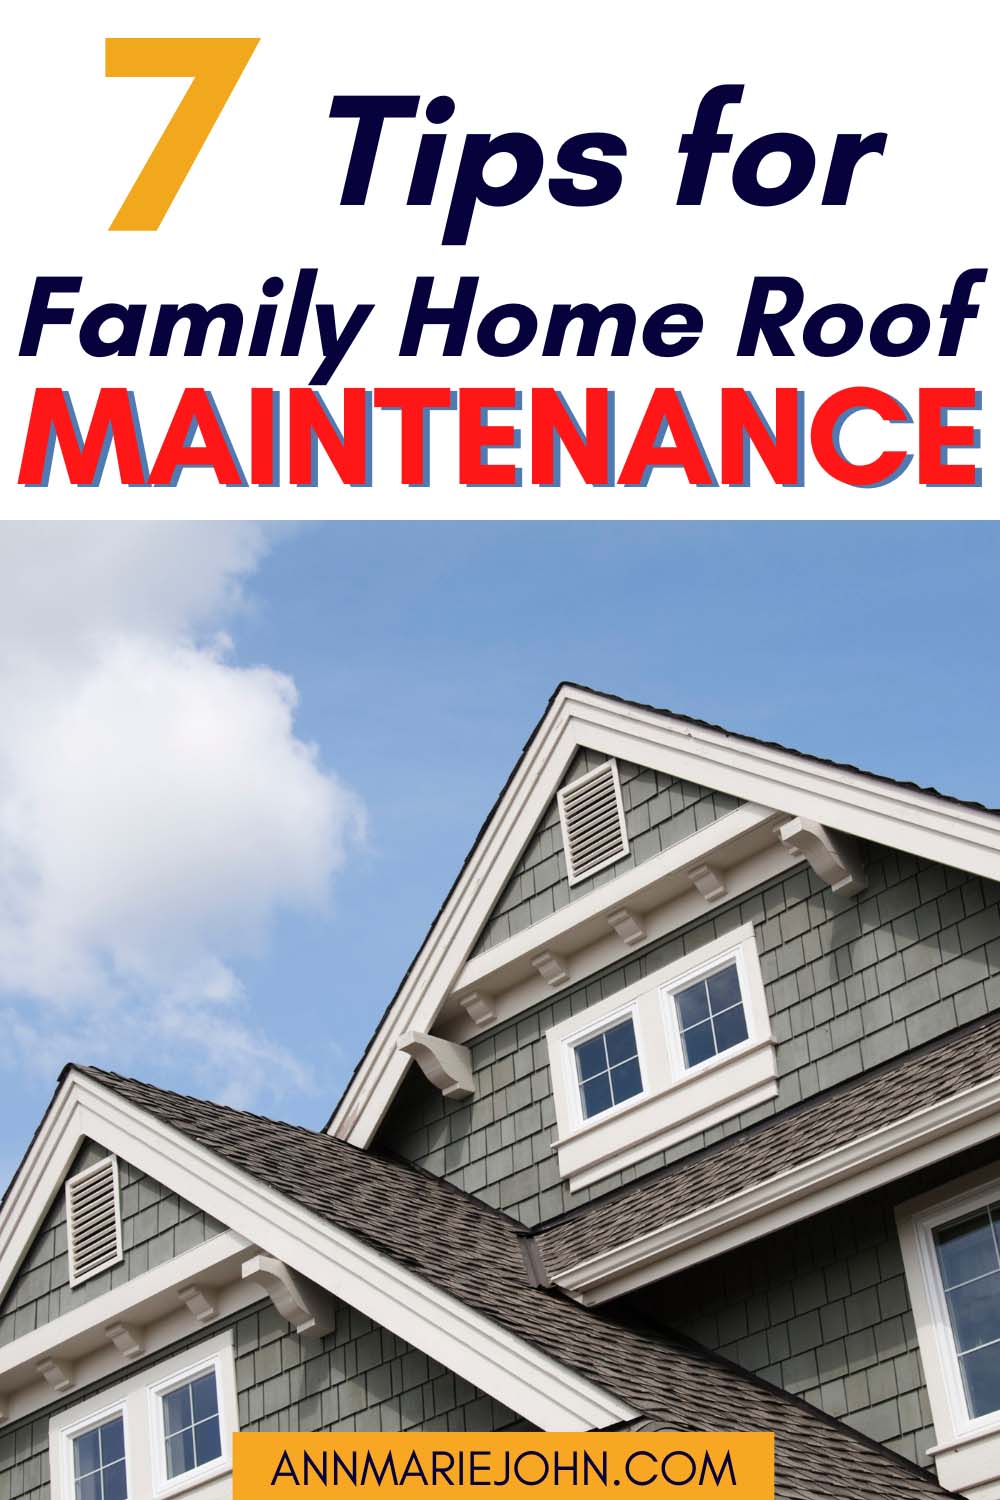 Family Home Roof Maintenance